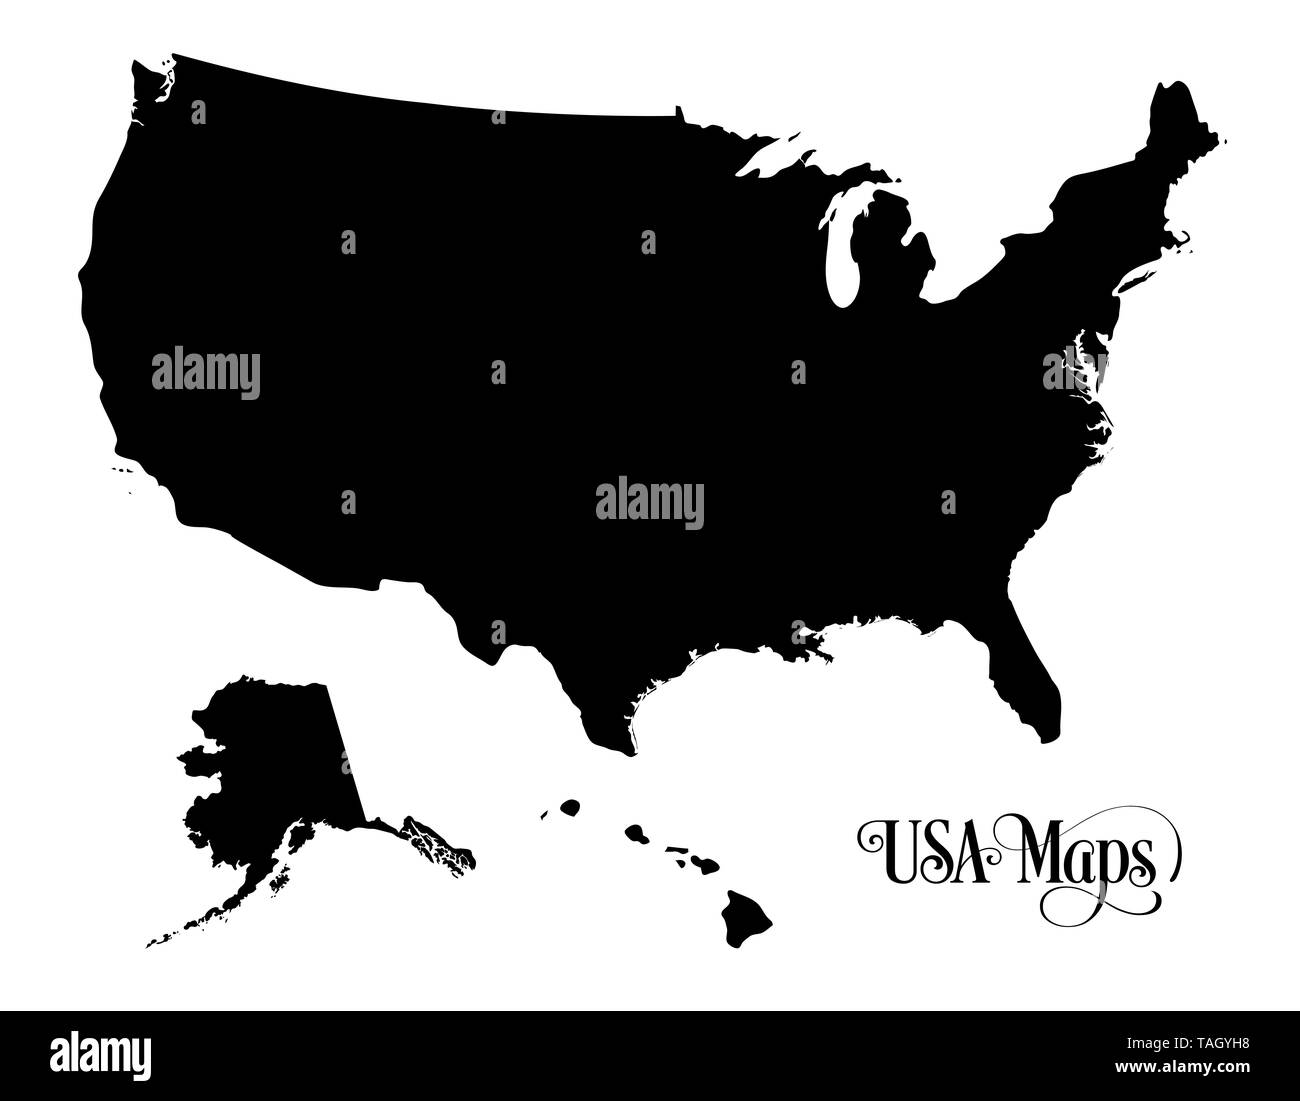 Map of The United States of America (USA) Silhouette Illustration on White Background. Stock Photo